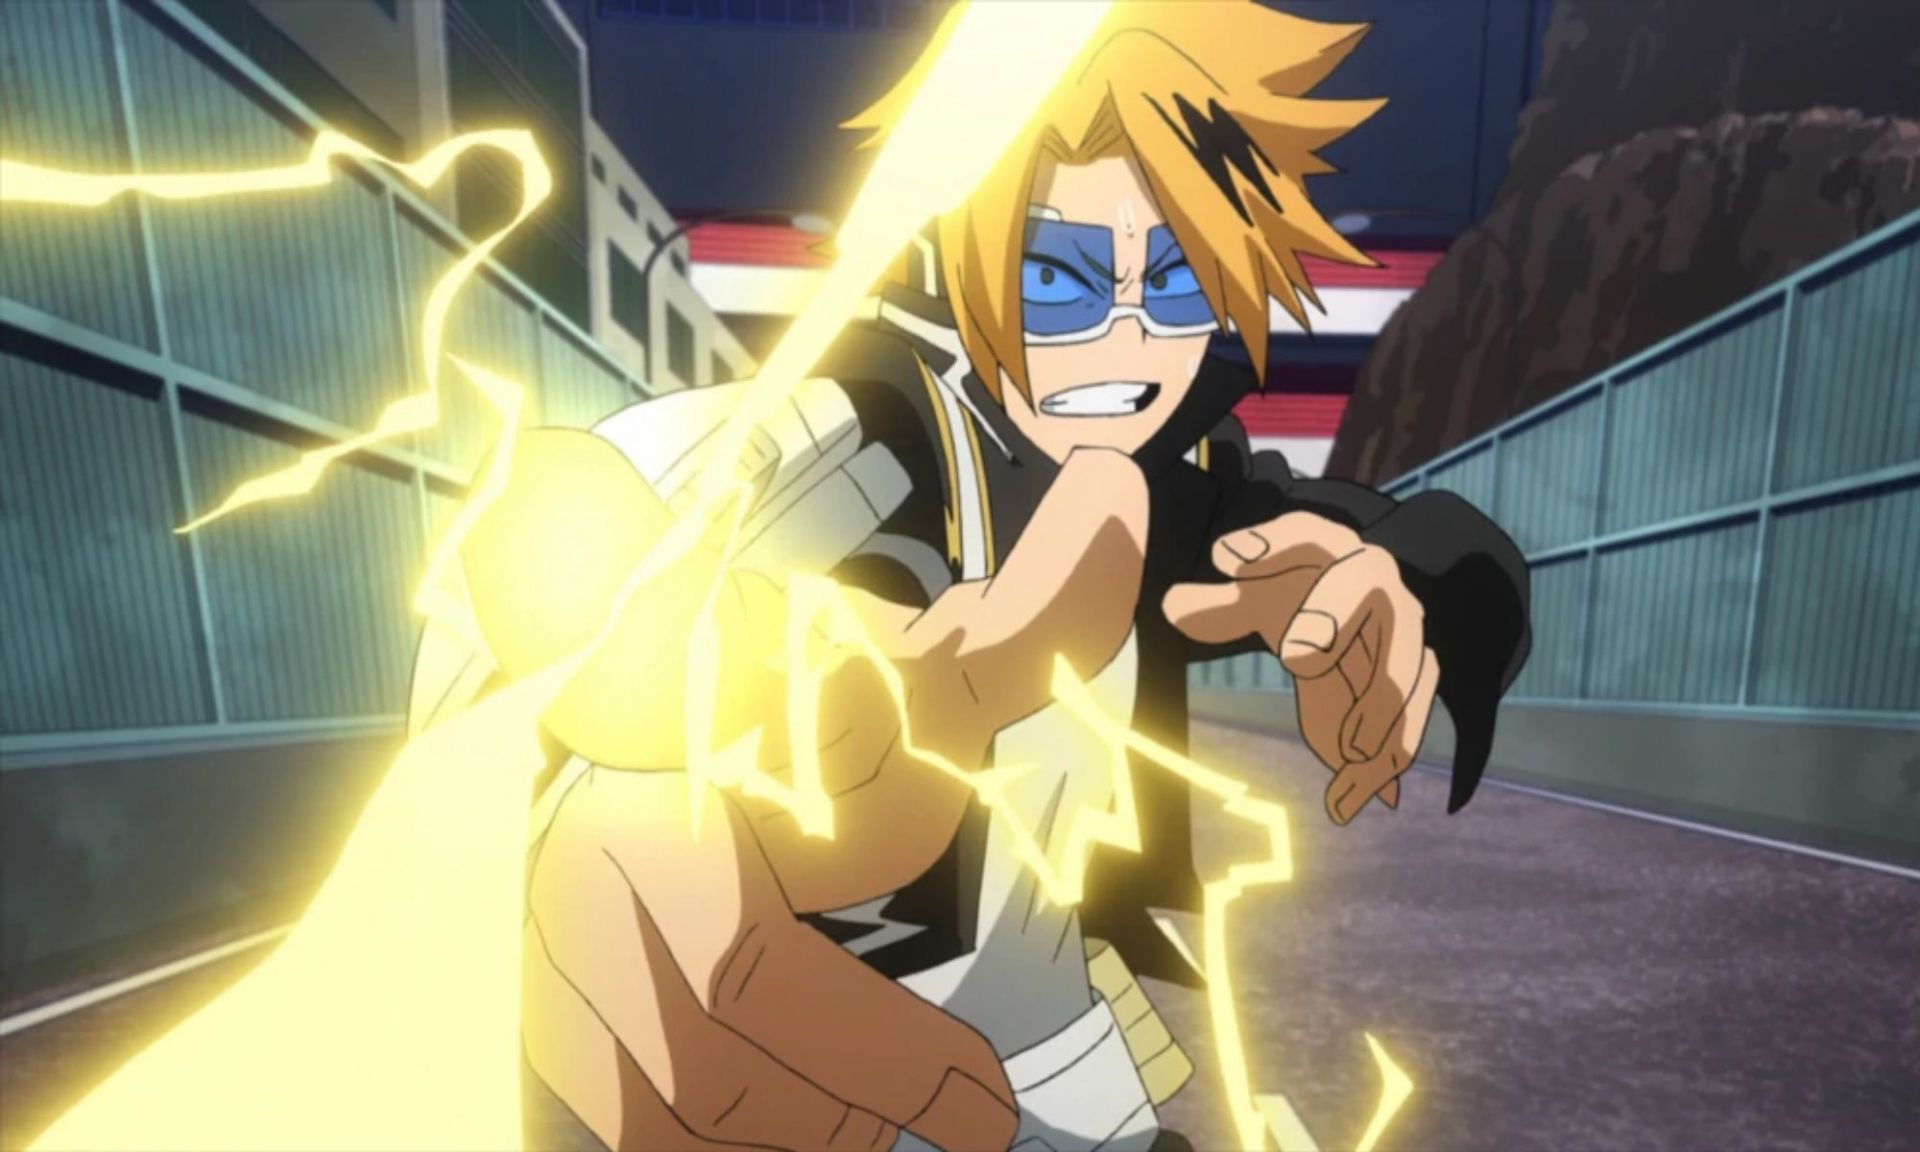 Kaminari will leave his opponents shocked